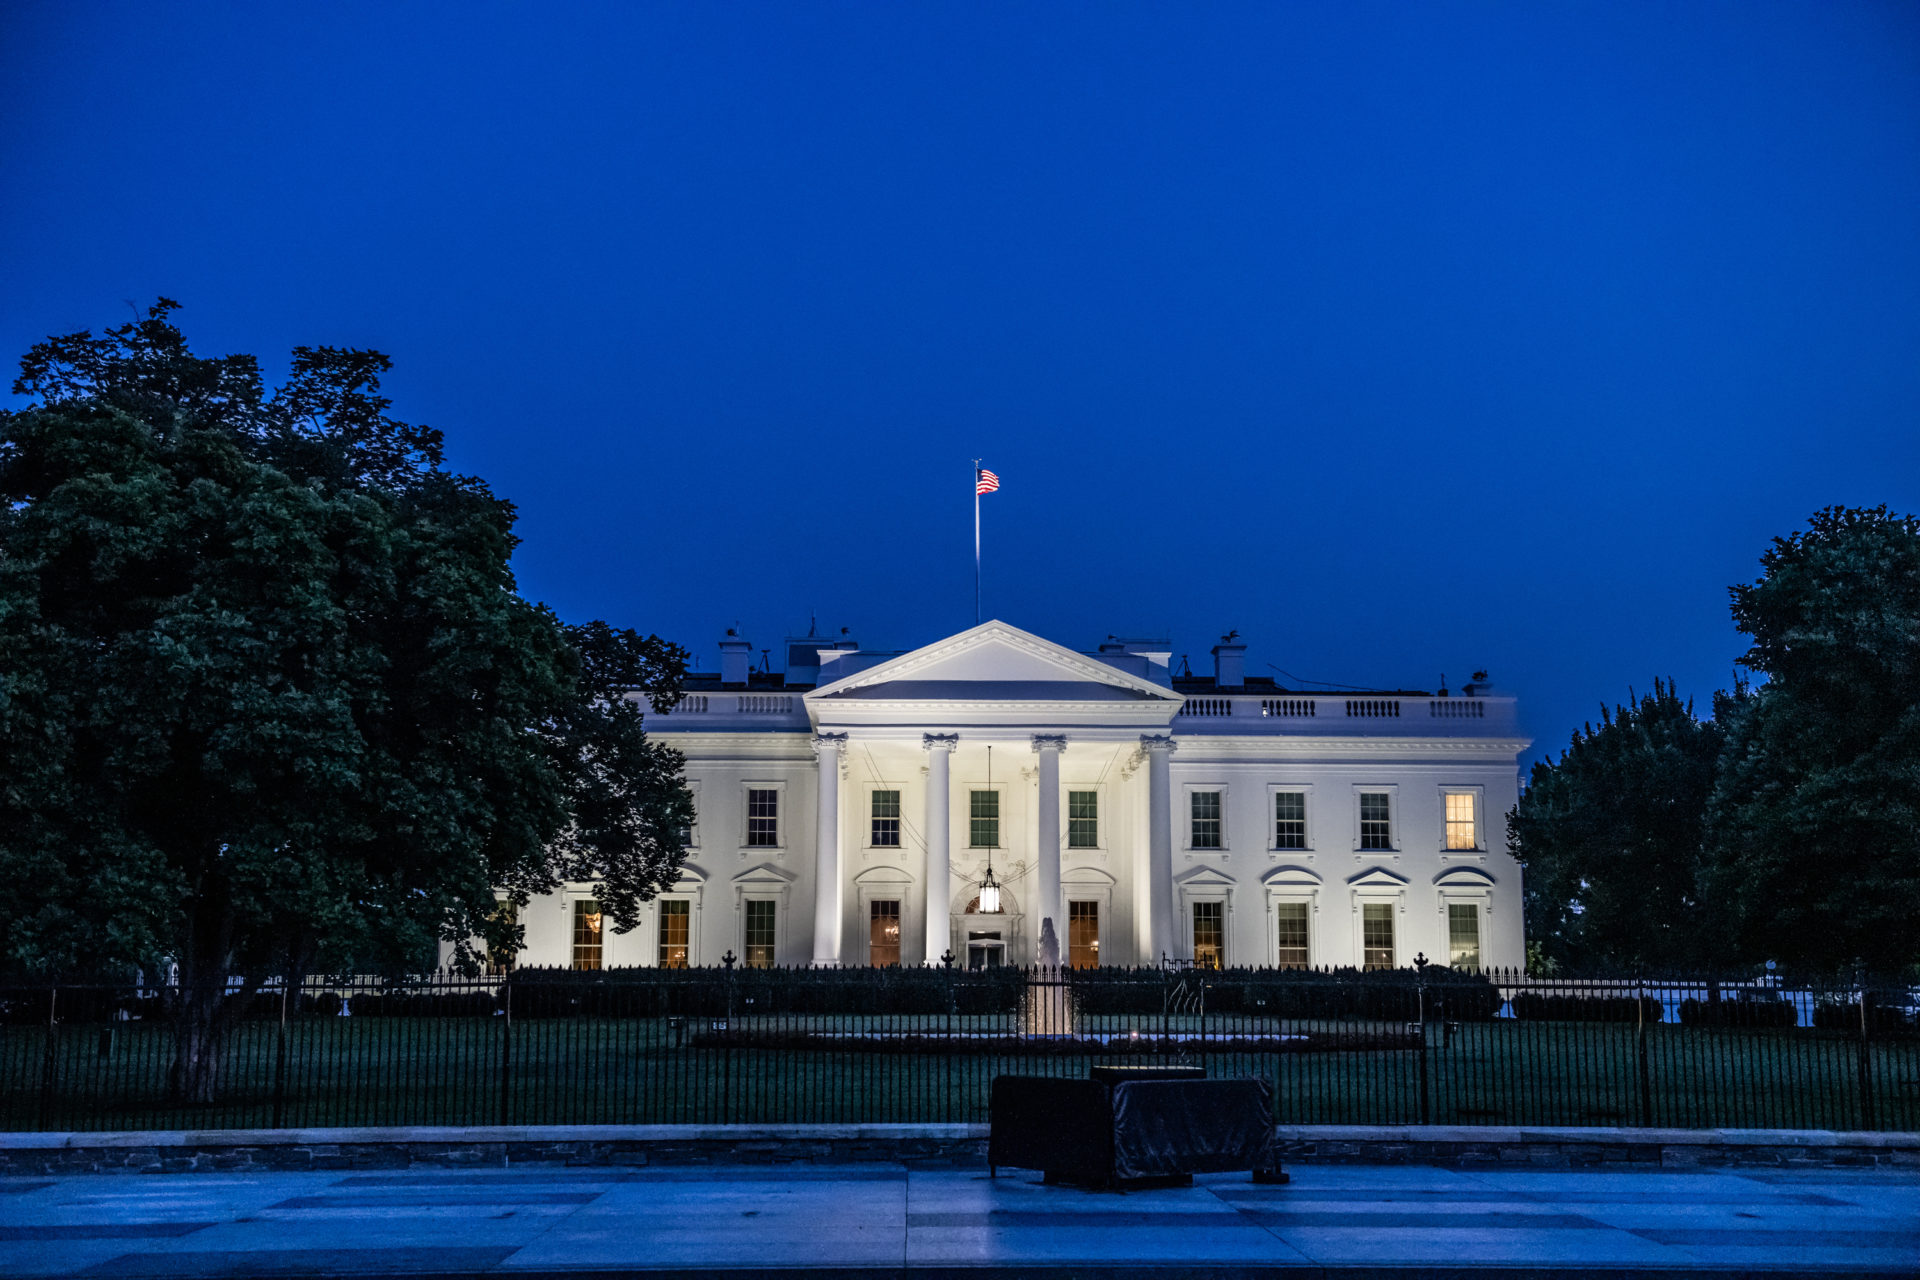 Horizontal color photo of White House in Washington DC on a clear summer evening